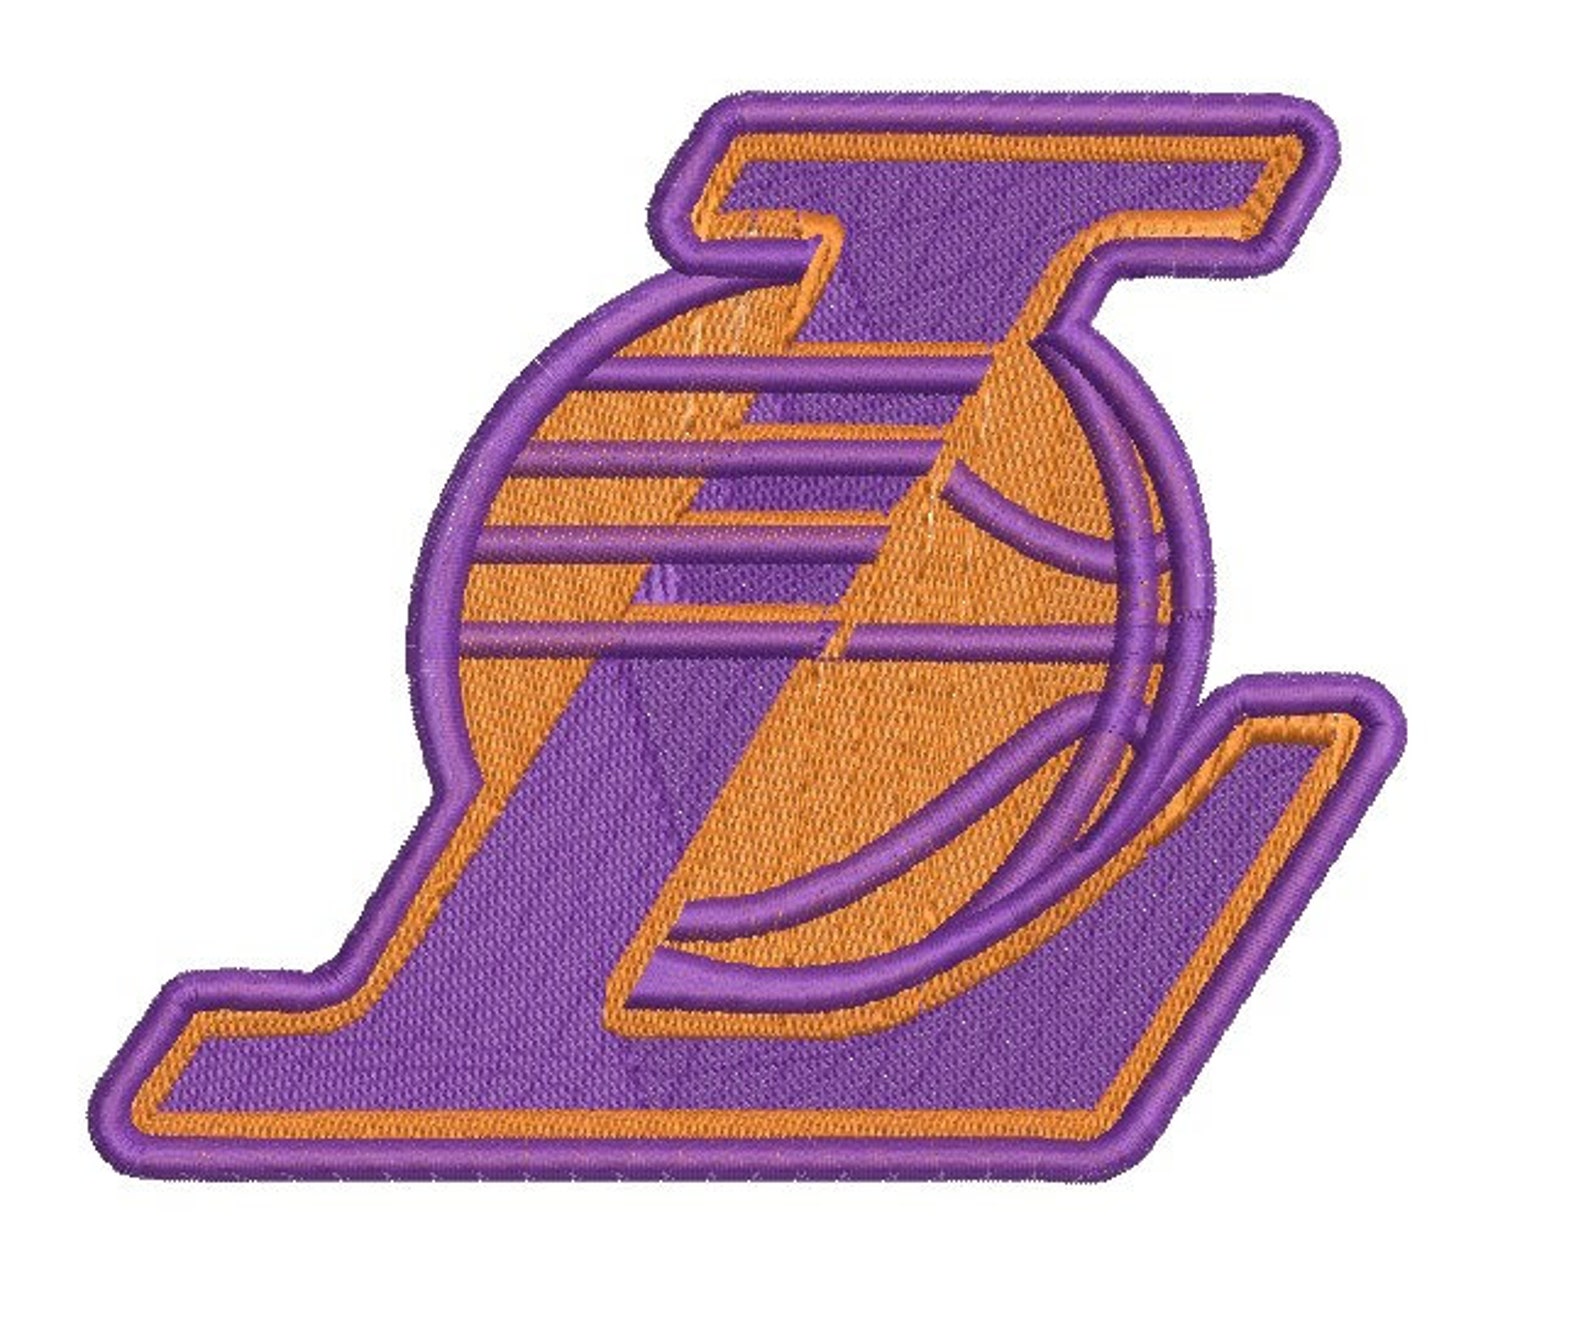 Las Angeles Lakers 8 sizes basketball team Embroidery design. | Etsy